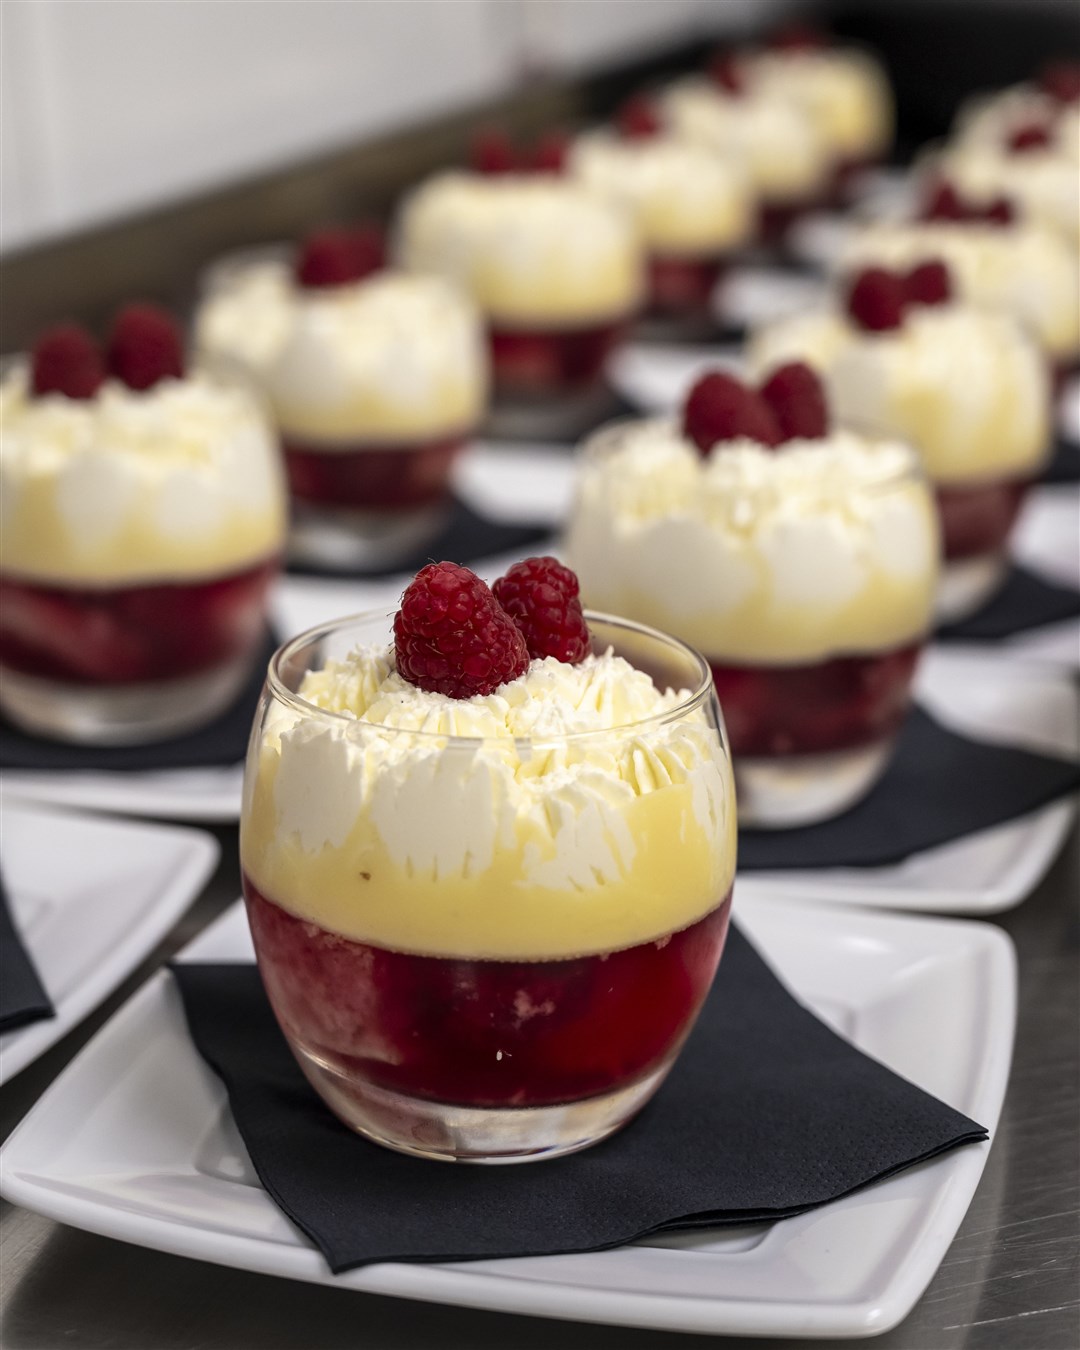 Whisky-infused trifle. Picture: Elliot Roberts Shooting